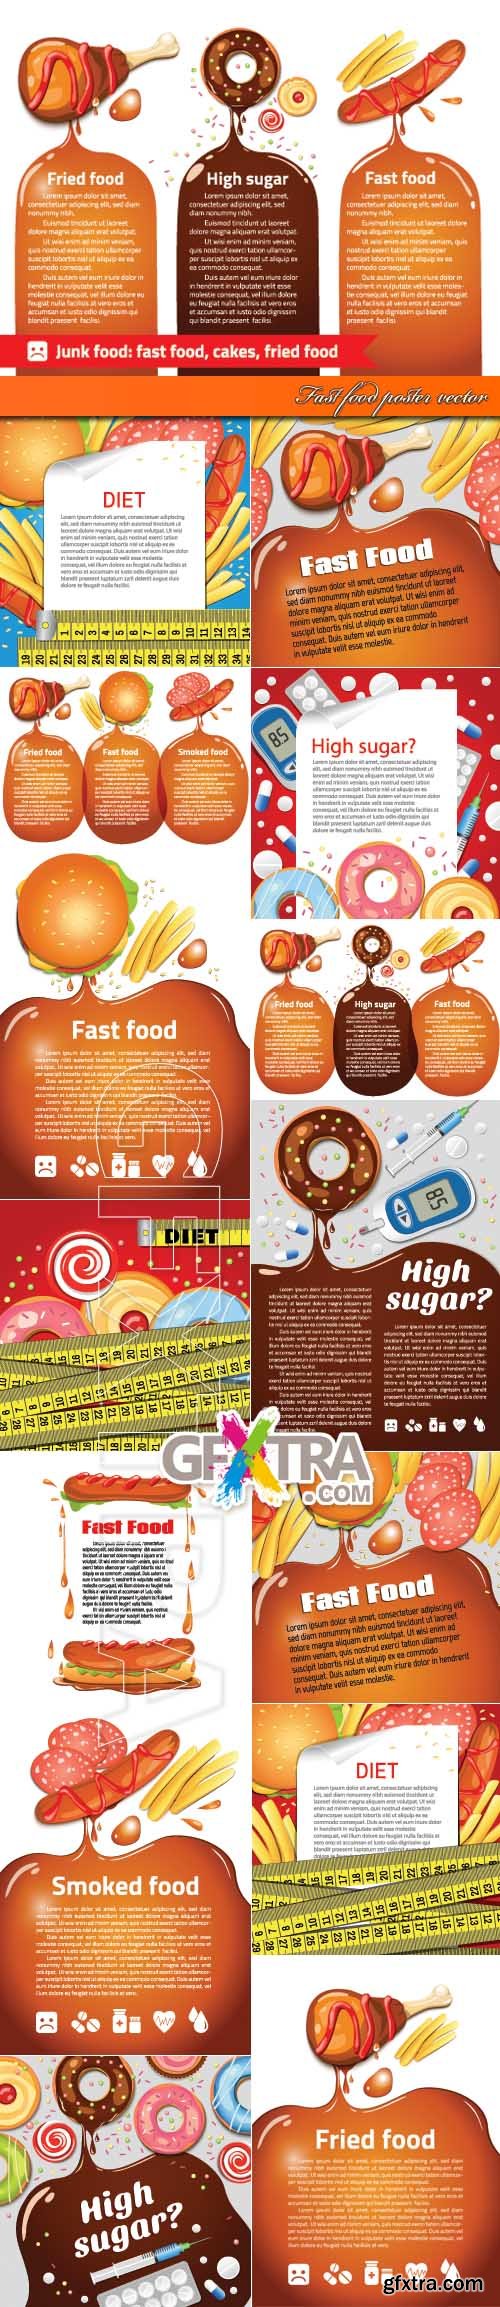 Fast food poster vector